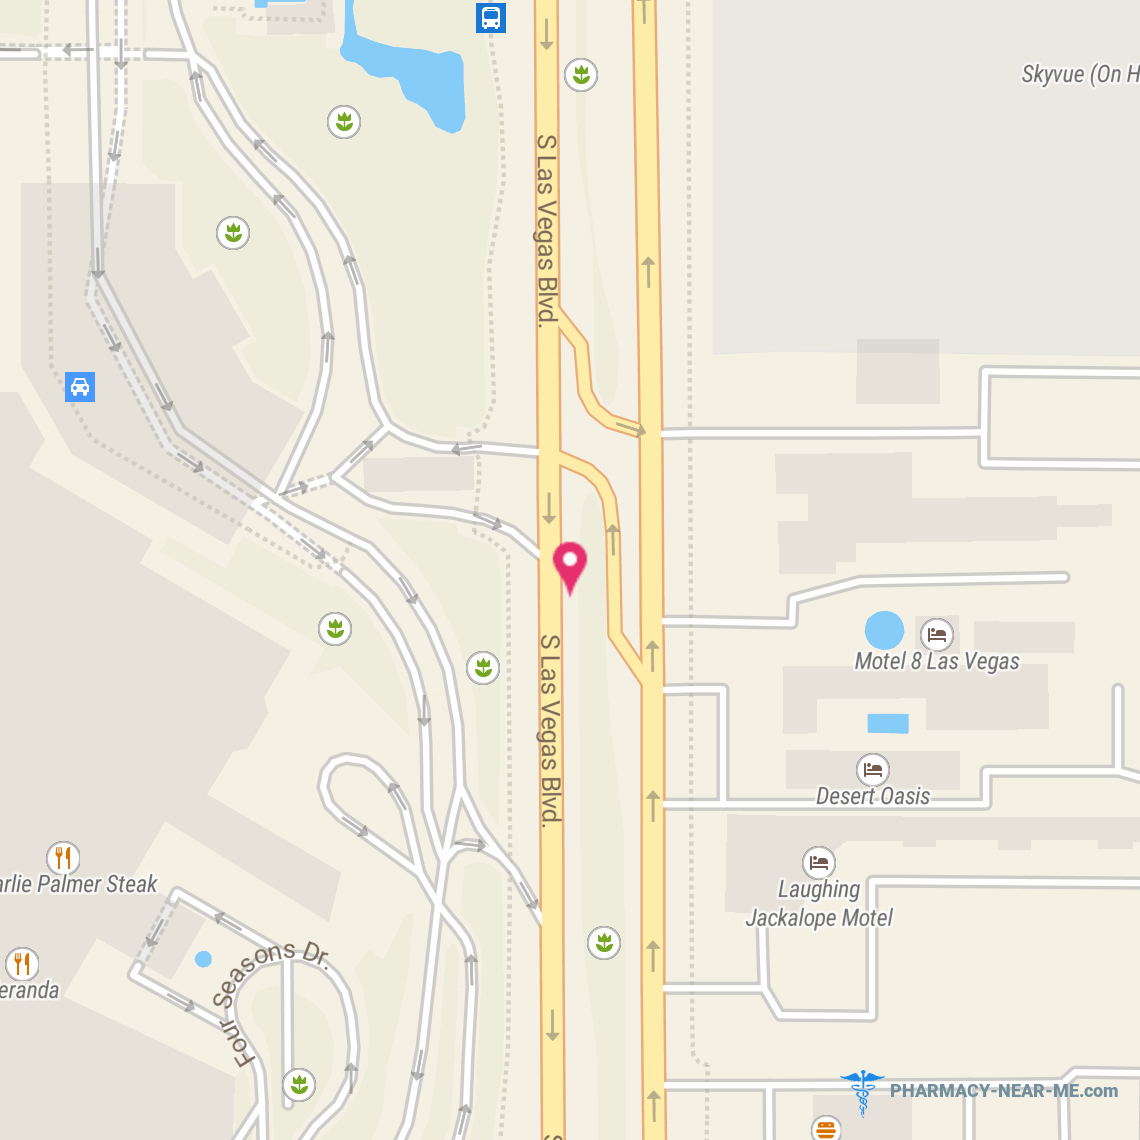 NELLIS MOD PHCY - Pharmacy Hours, Phone, Reviews & Information: 4700 Las Vegas Boulevard North, Nellis AFB, Nevada 89191, United States